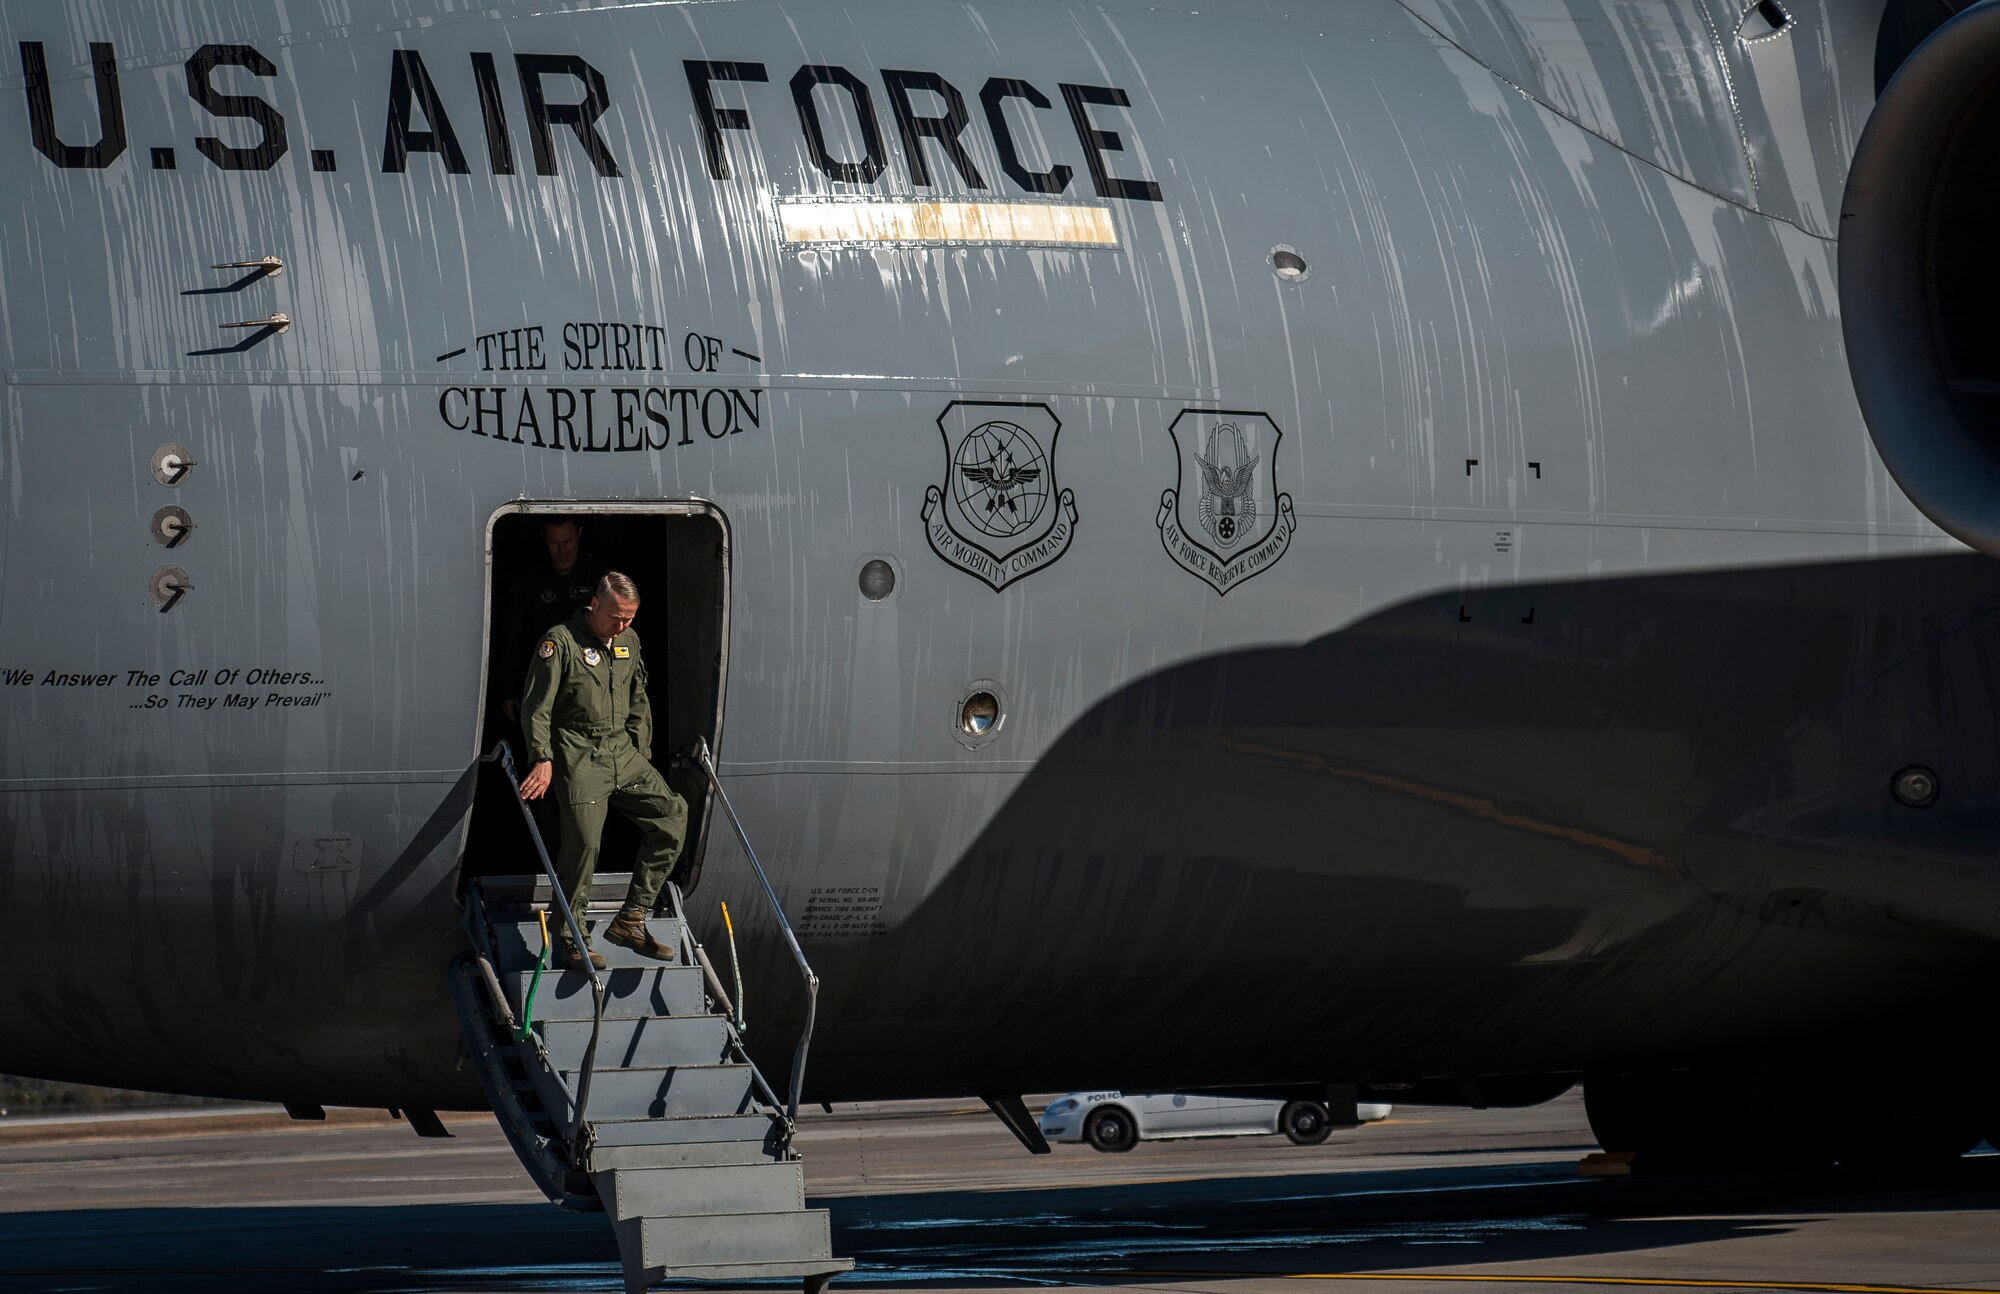 Col. Darren Hartford, 437th Airlift Wing commander, exits a C-17 Globemaster III after completing a flight Dec. 18, 2013 at Joint Base Charleston – Air Base, S.C. The aircraft, nicknamed the “Spirit of Charleston” was the first C-17 in the U.S. Air Force’s inventory and has flown missions throughout the world for more than two decades. (U.S. Air Force photo / Senior Airman Tom Brading)